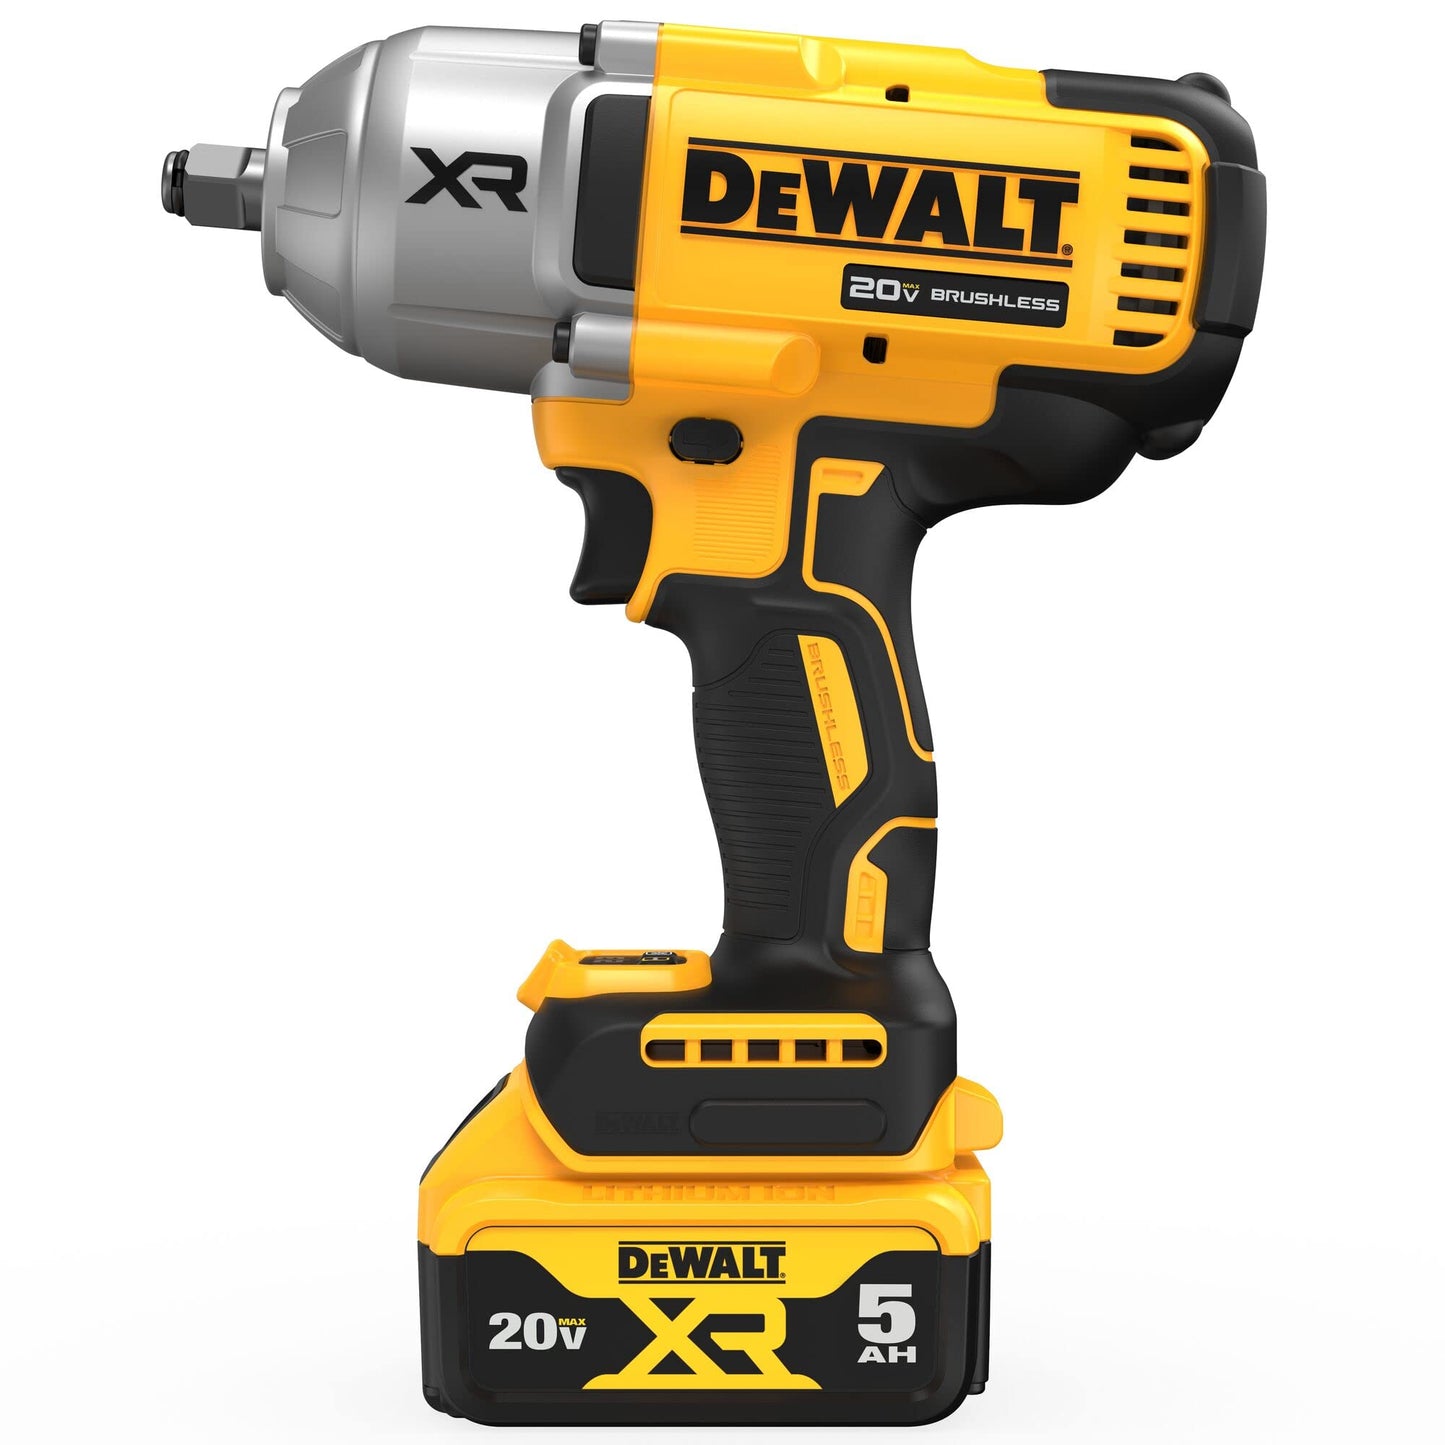 *DEWALT 20V MAX Cordless Impact Wrench Kit, 1/2" Hog Ring With 4-Mode Speed, Includes Battery, Charger and Bag (DCF900P1)